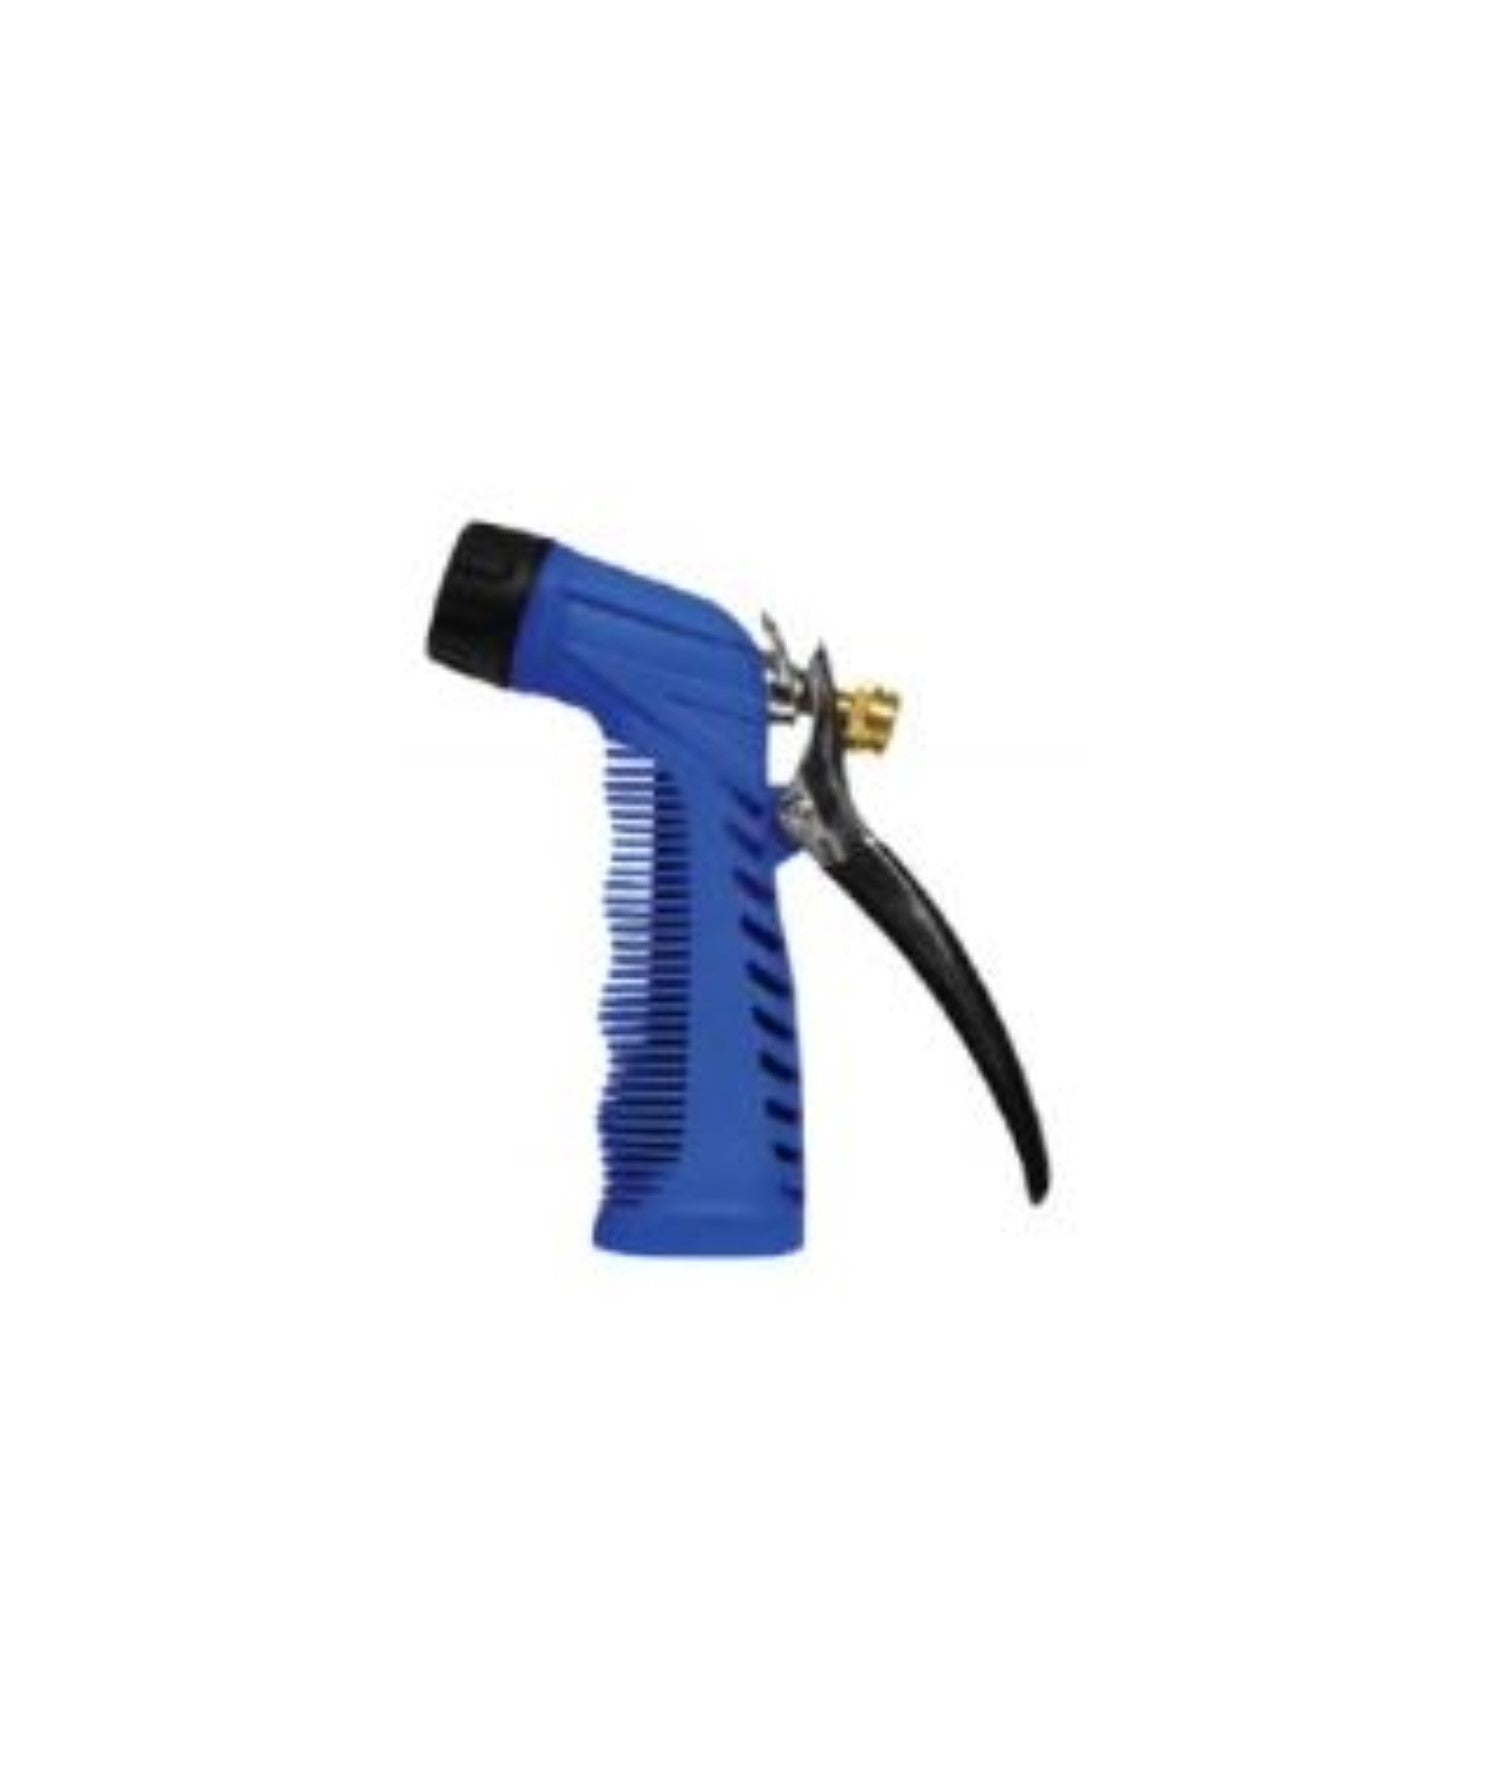 Hose Nozzle Insulated Deluxe Blue